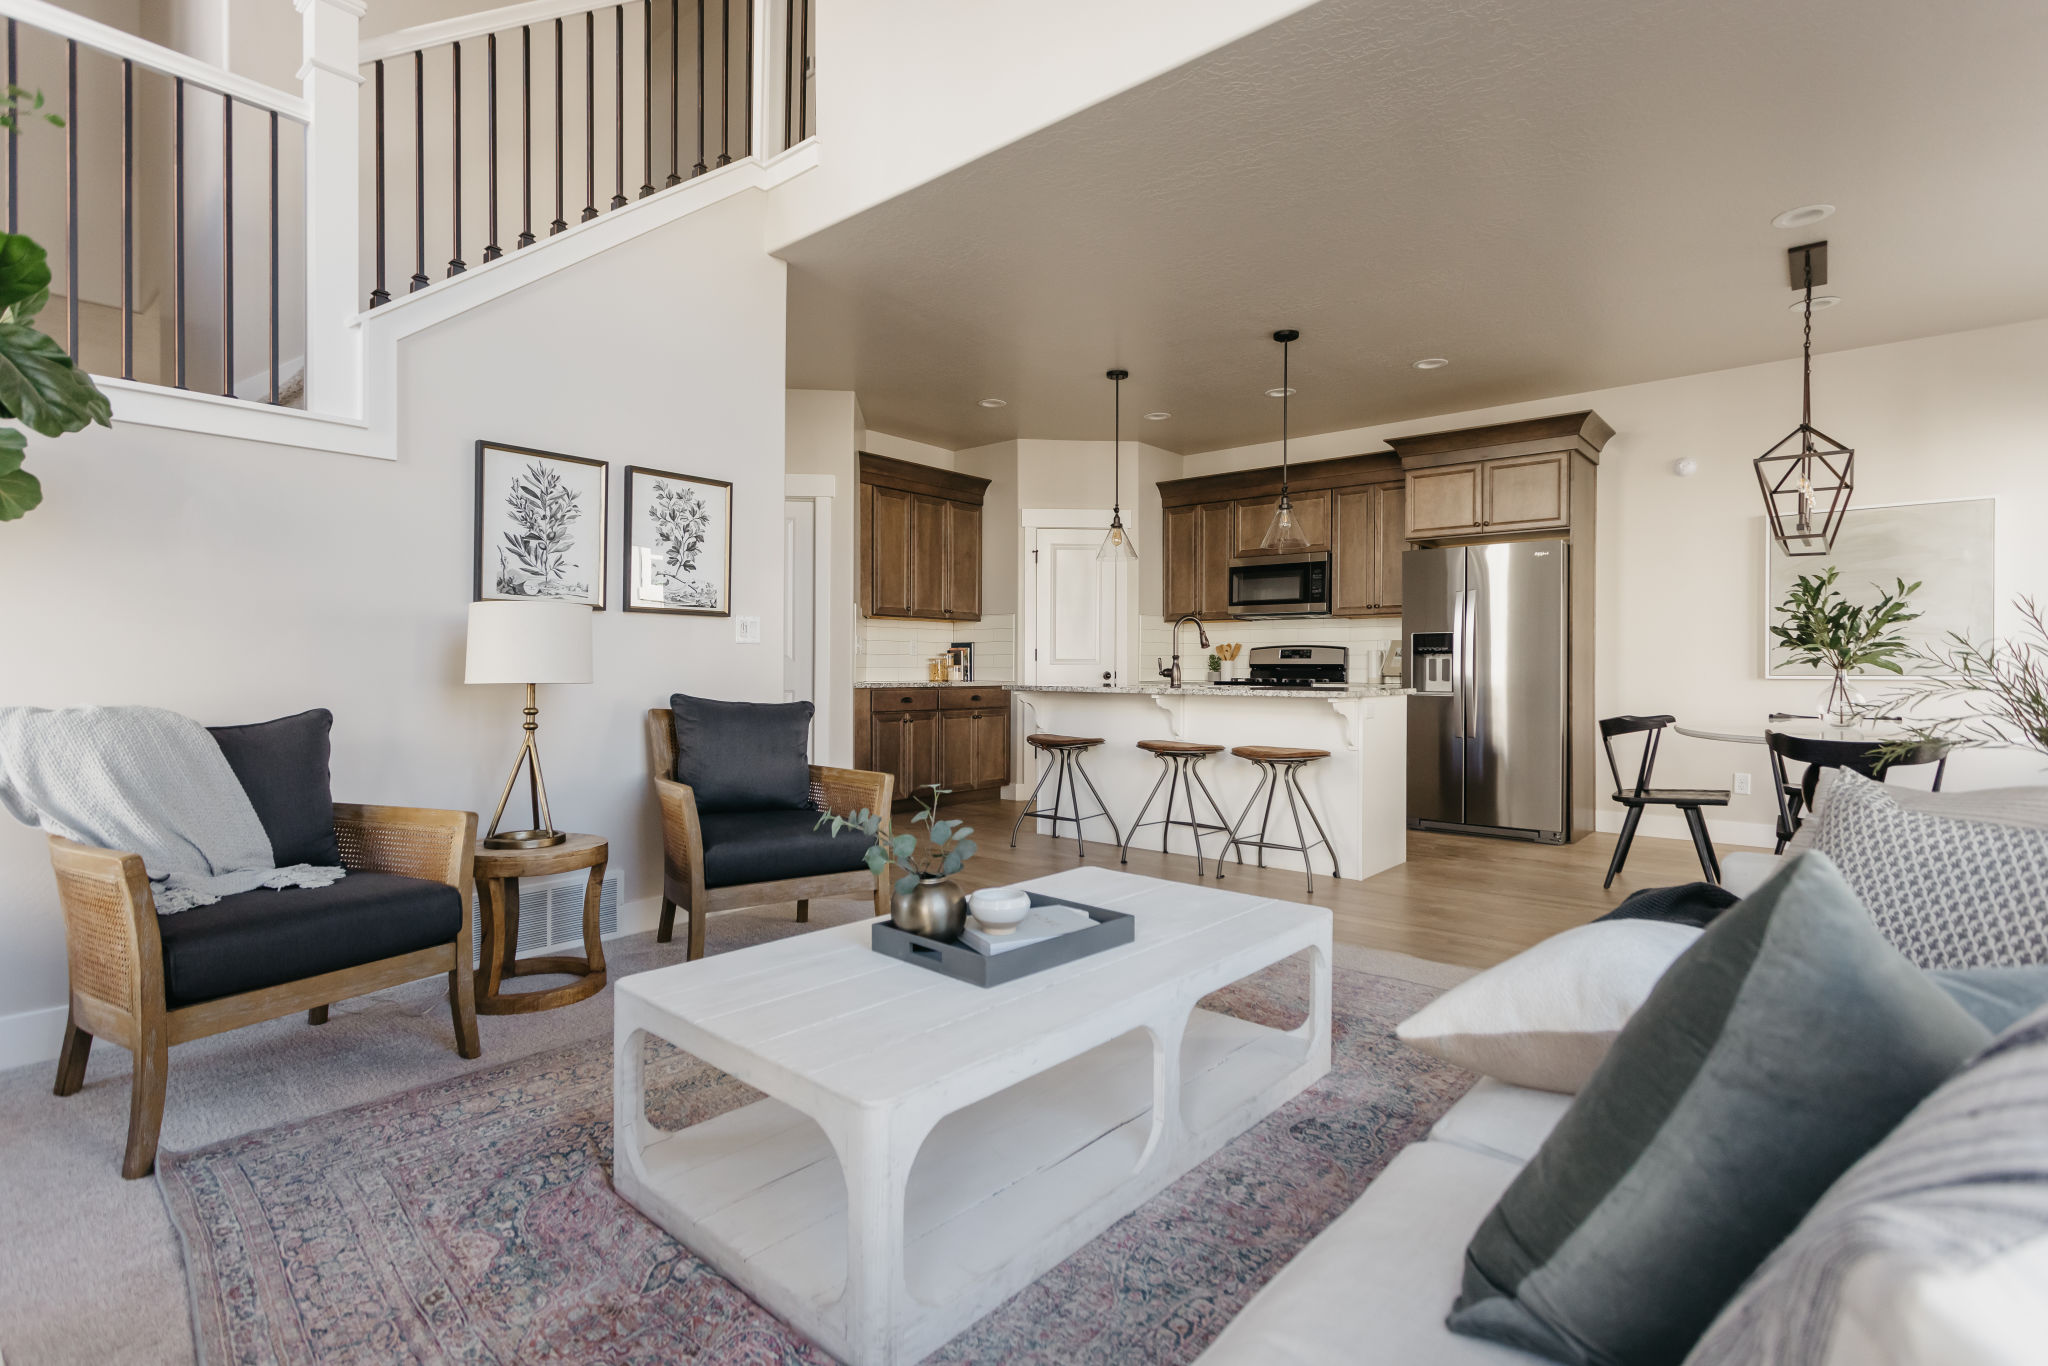 EdgeHomes: The Exchange Townhomes